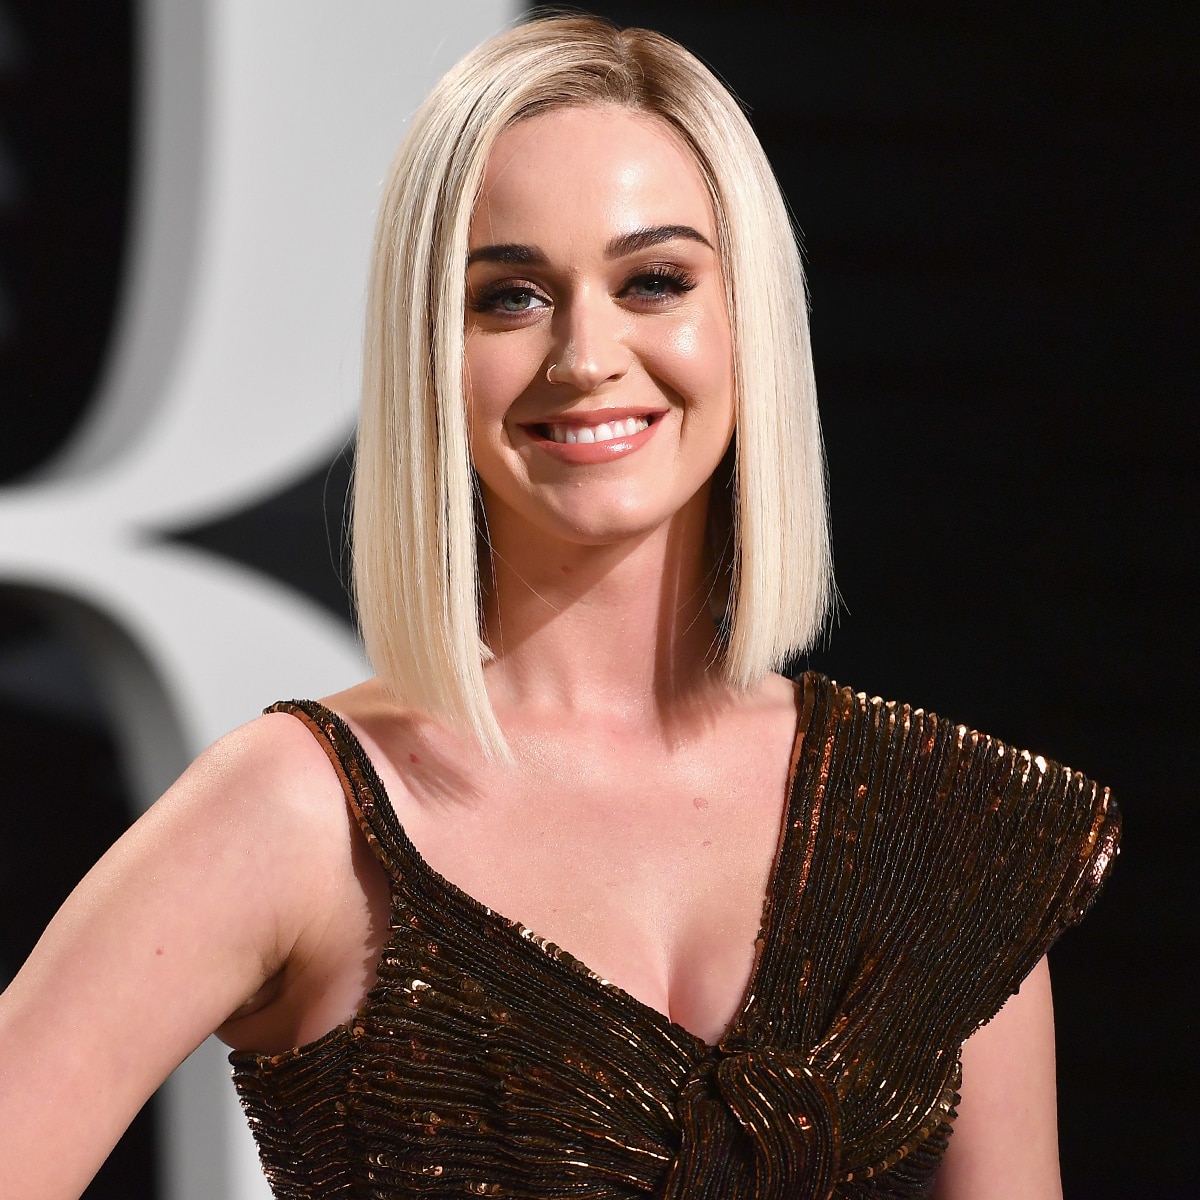 Katy Perrys Platinum Blond Pixie Cut Wasnt Entirely by Choice  Glamour